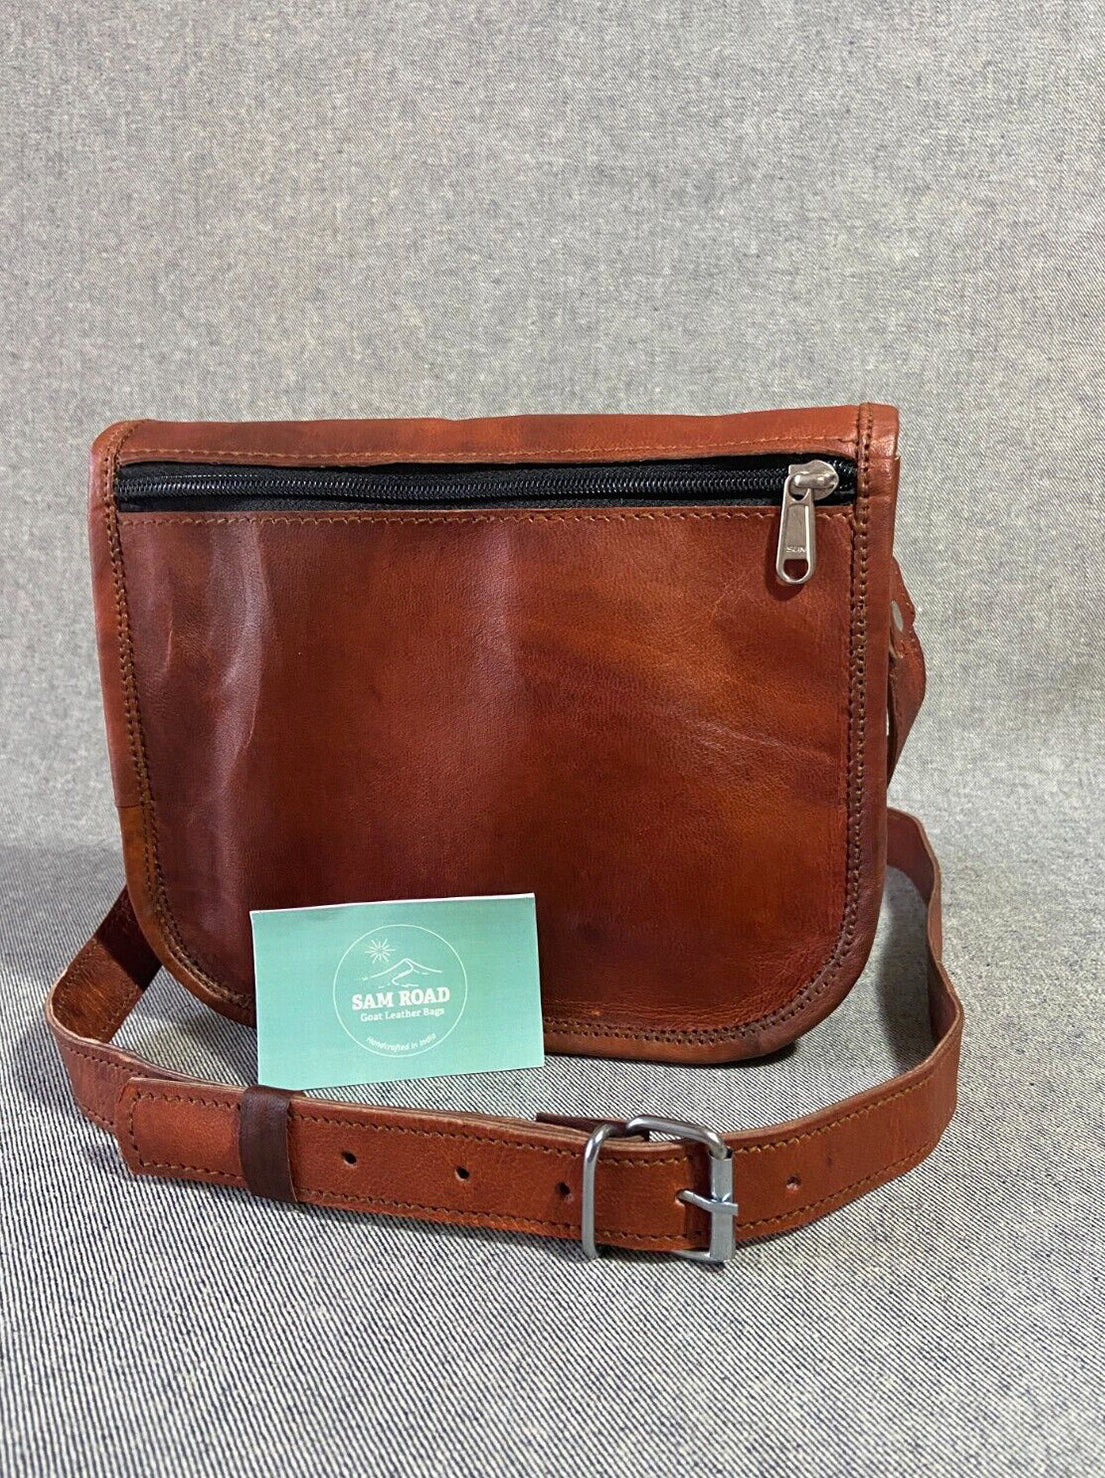 Billy Goat Designs - One Strap Leather Satchel - Extra Small 9" (S9R)